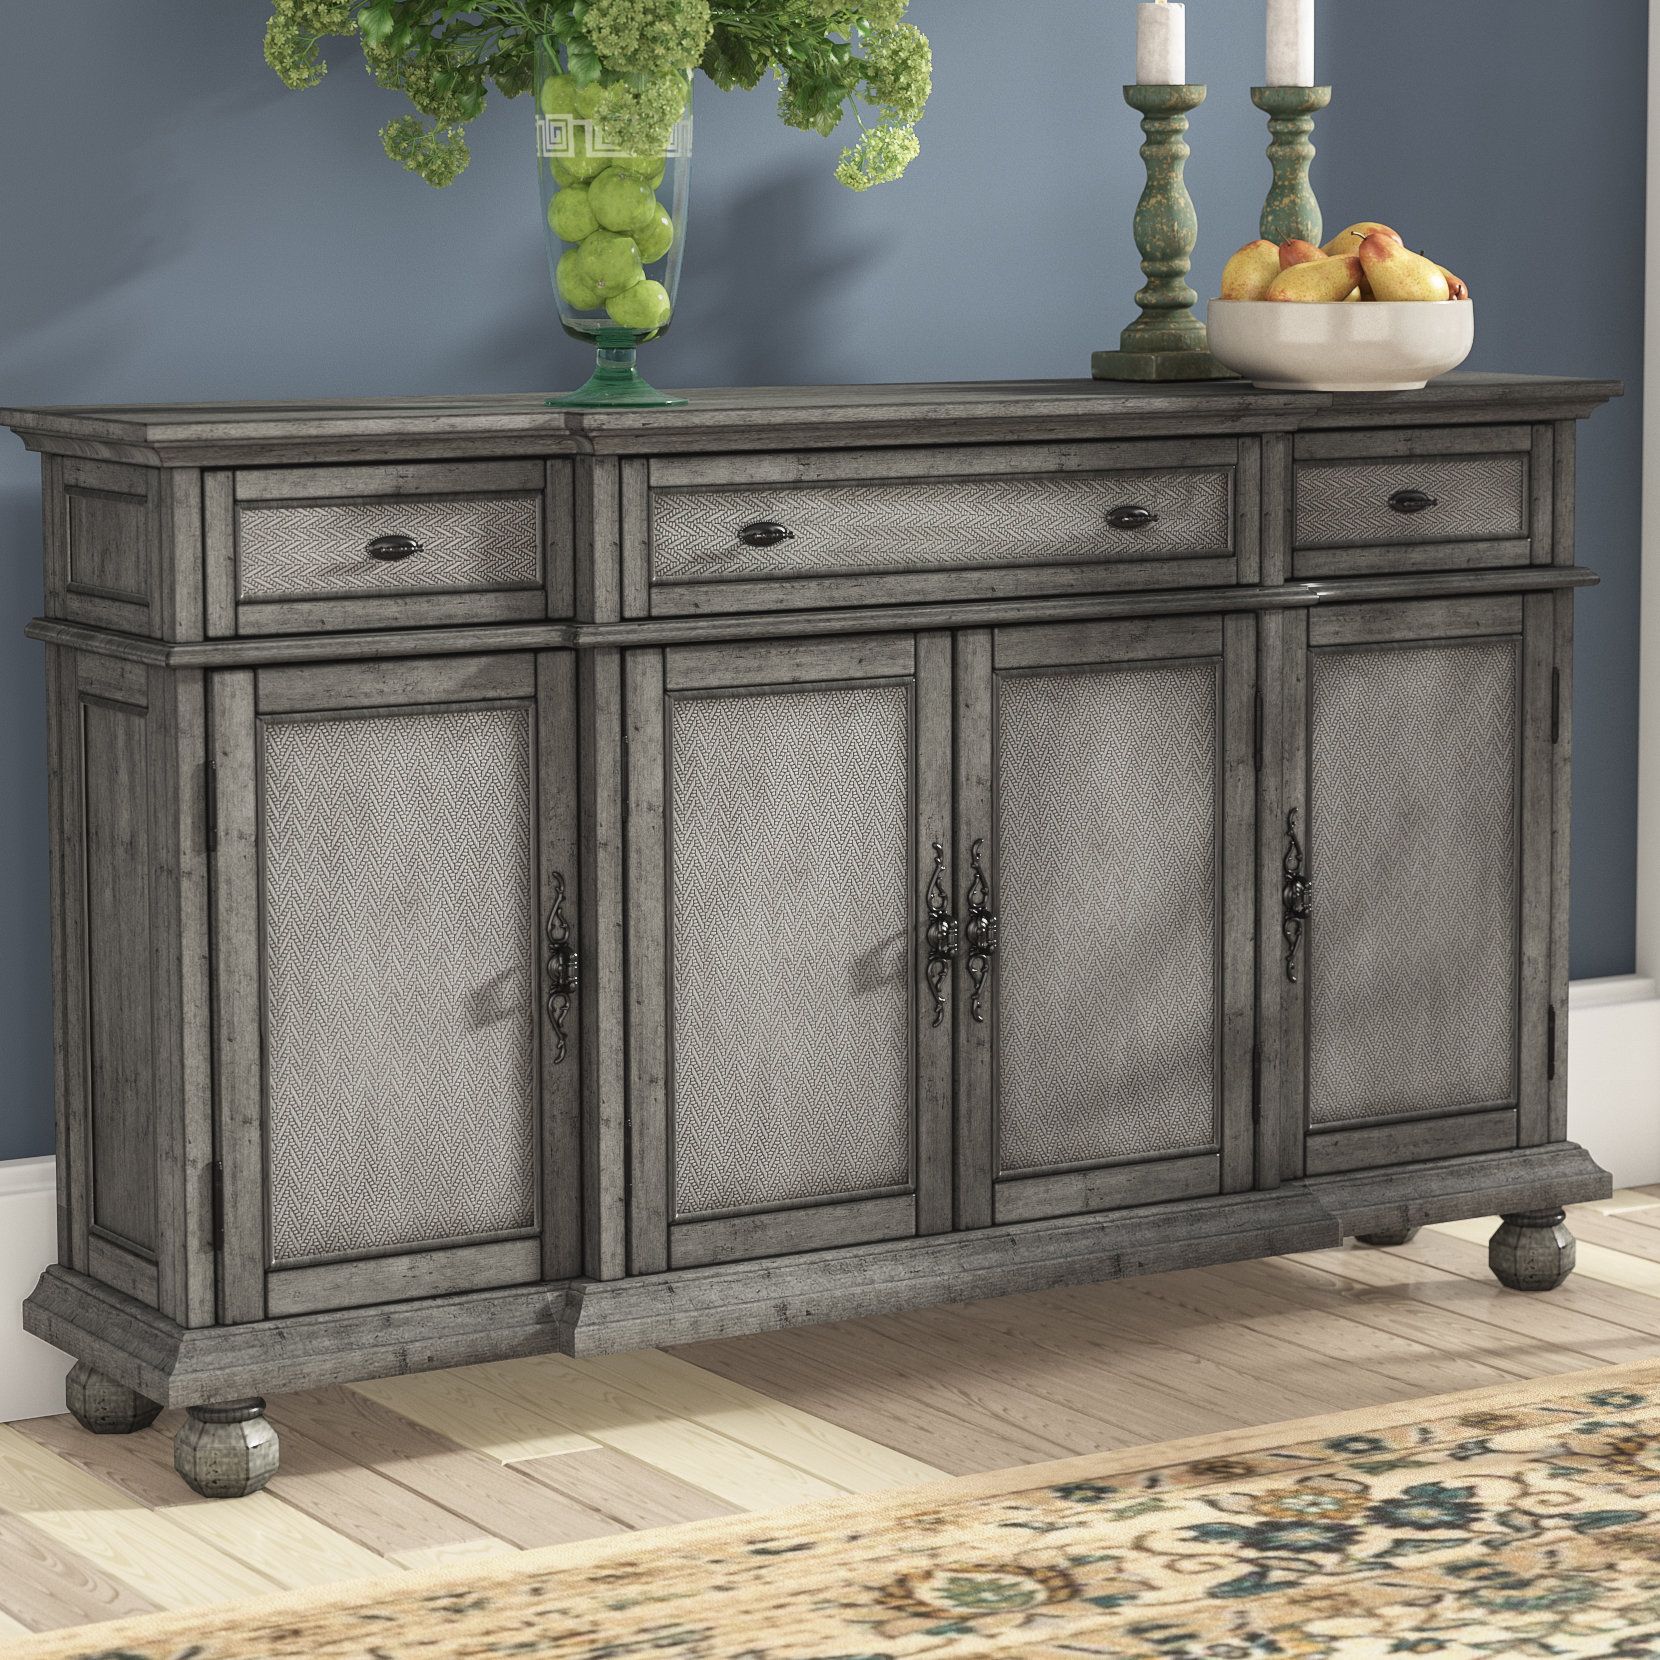 70 Inch Credenza You'll Love In 2019 | Wayfair Within Deana Credenzas (View 9 of 30)